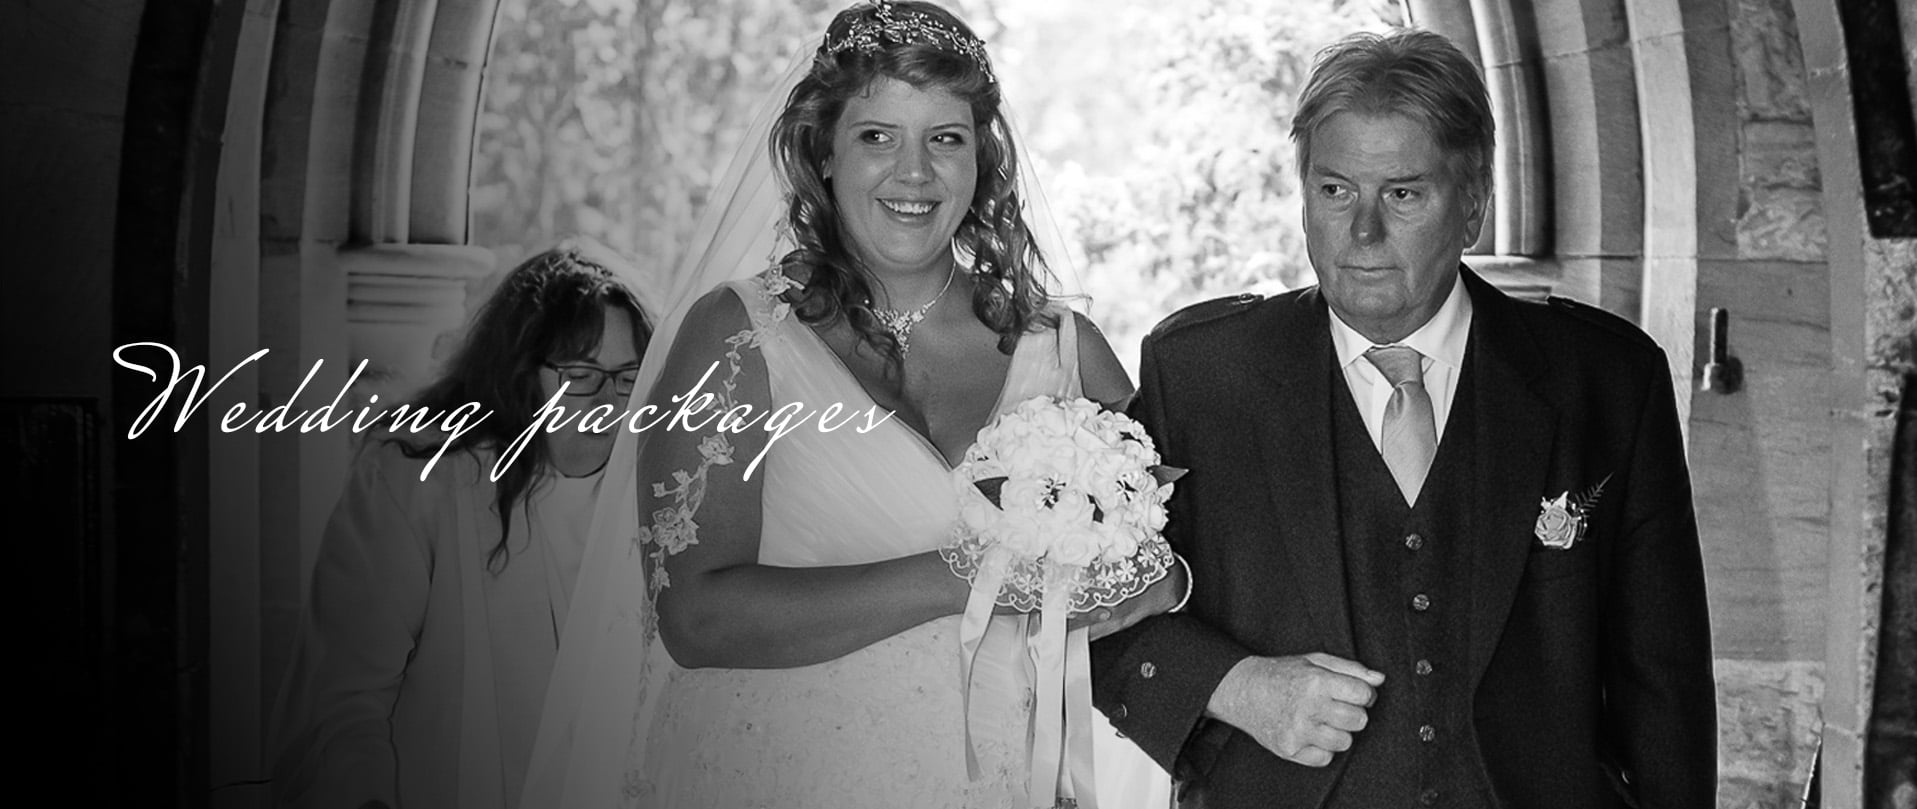 Wedding packages banner 2